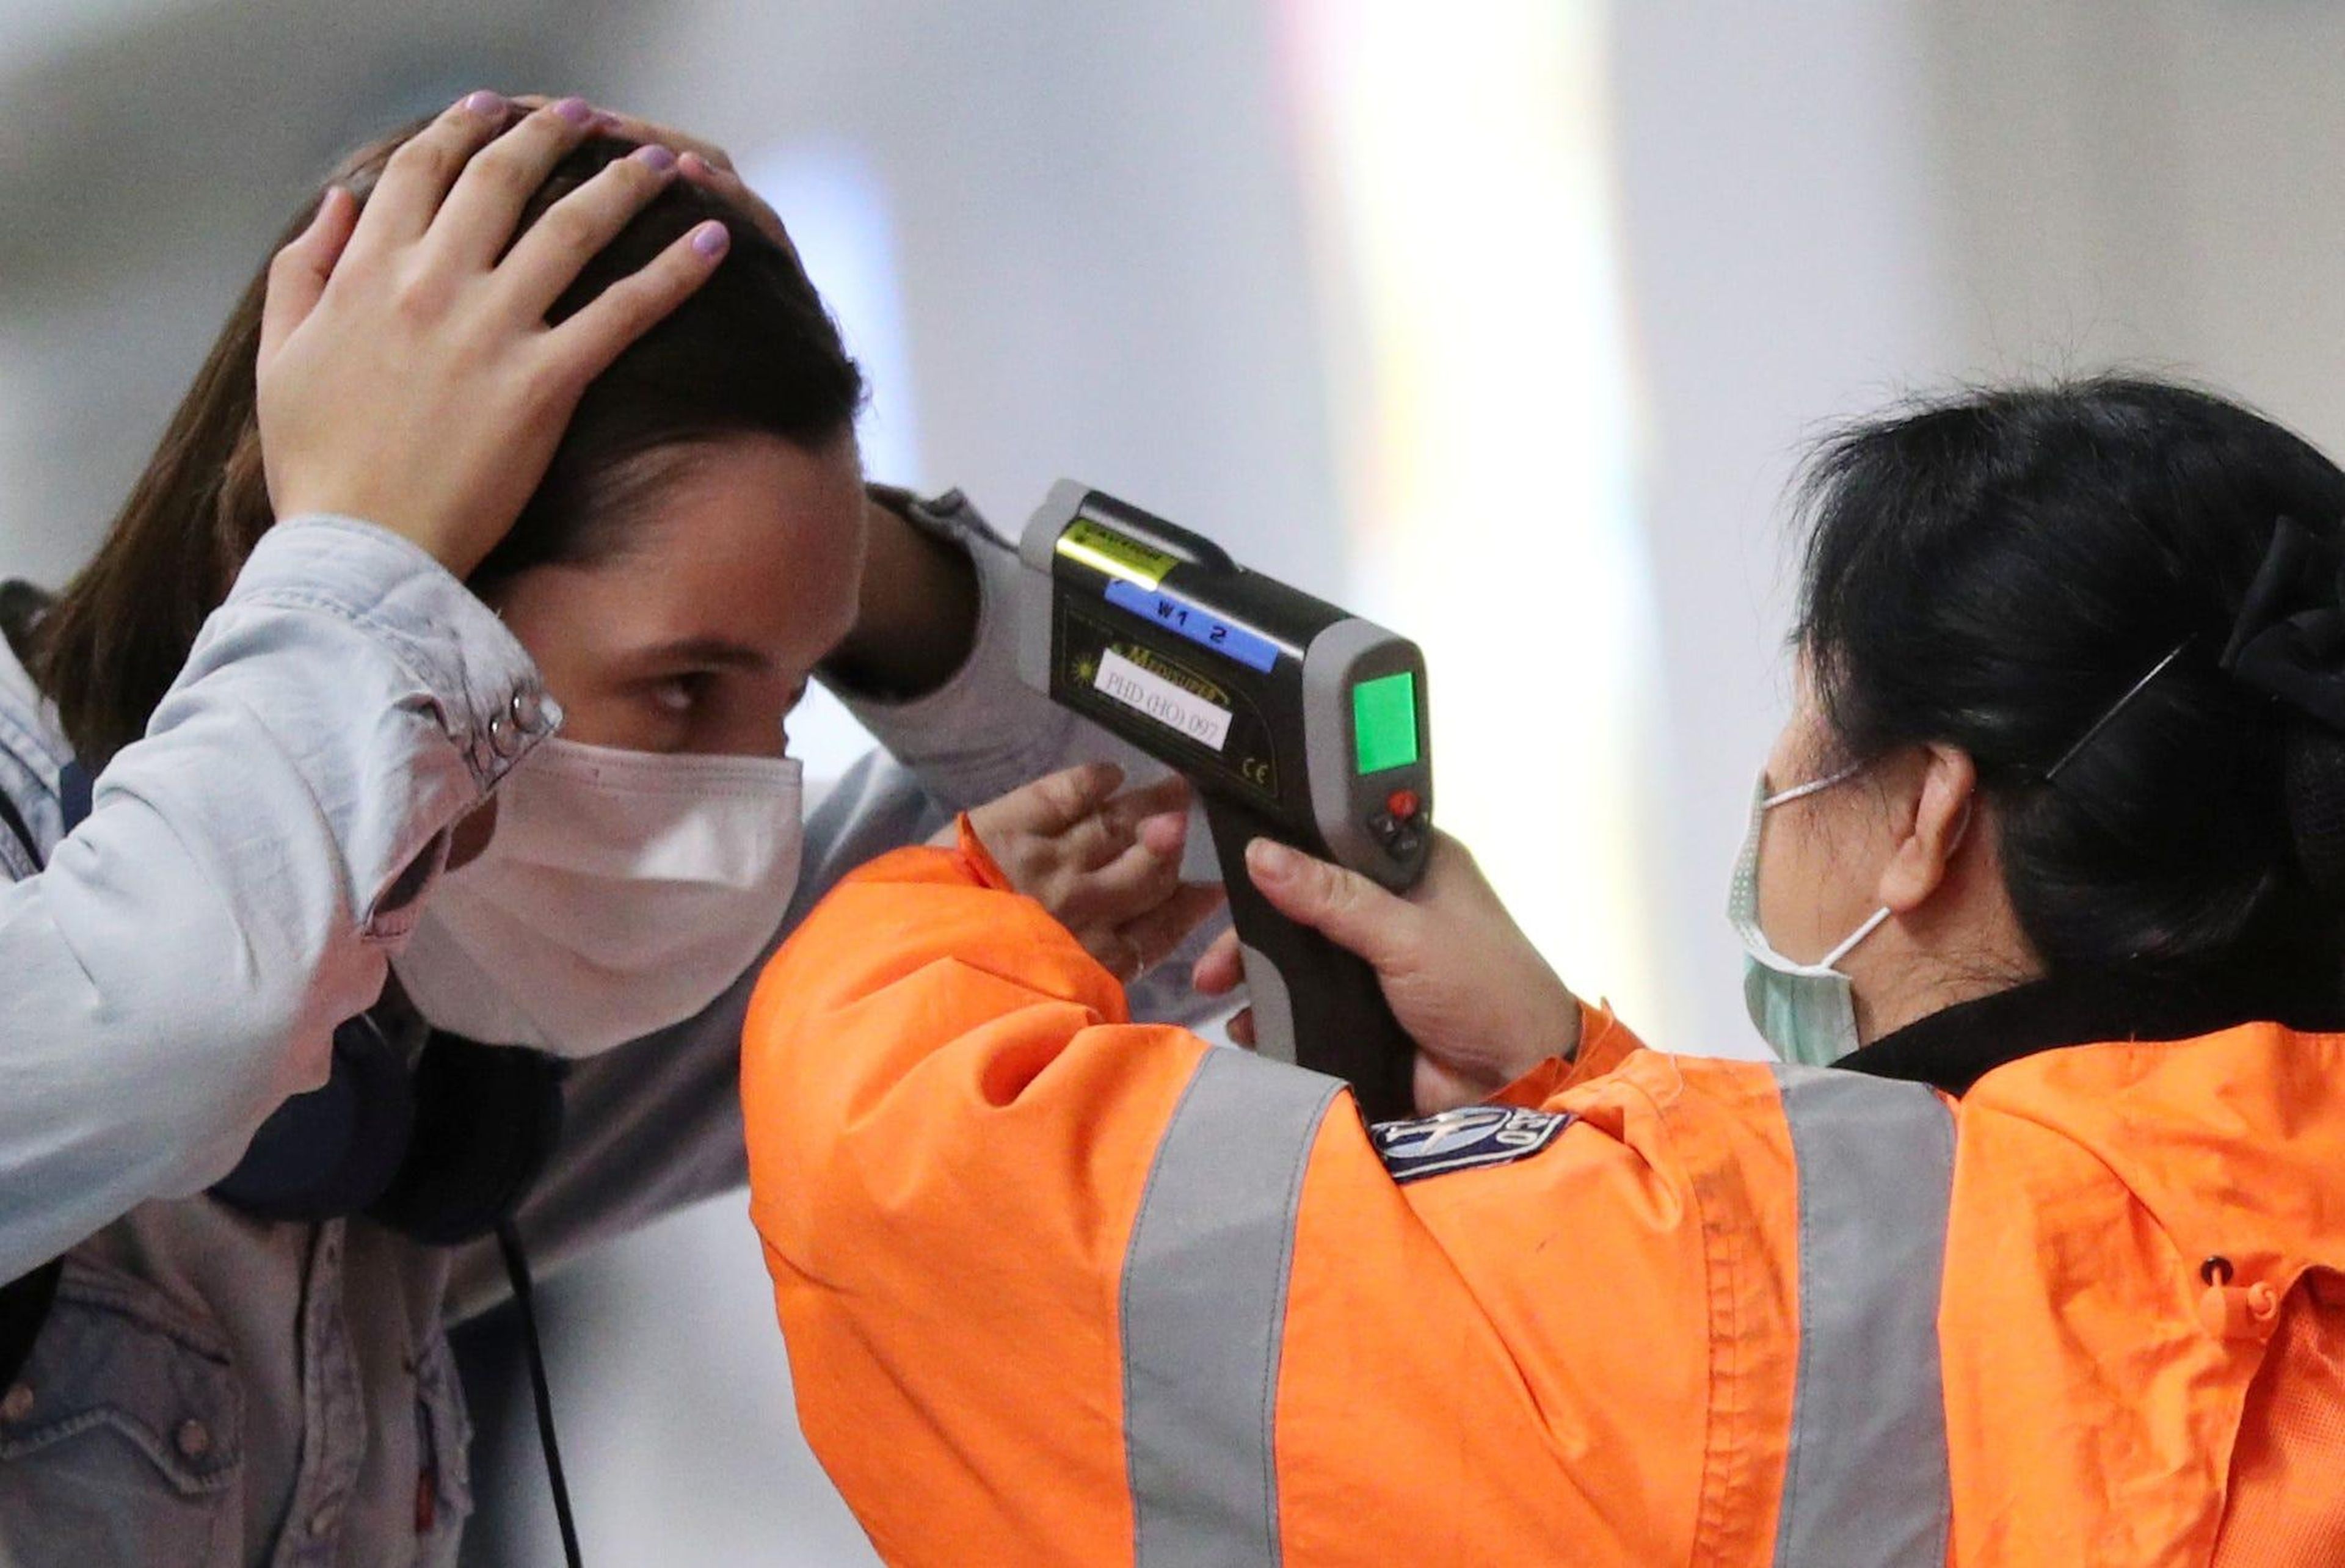 A worker checks the temperature of a passenger arriving into Hong Kong International Airport with an infrared thermometer. REUTERS/Hannah McKay